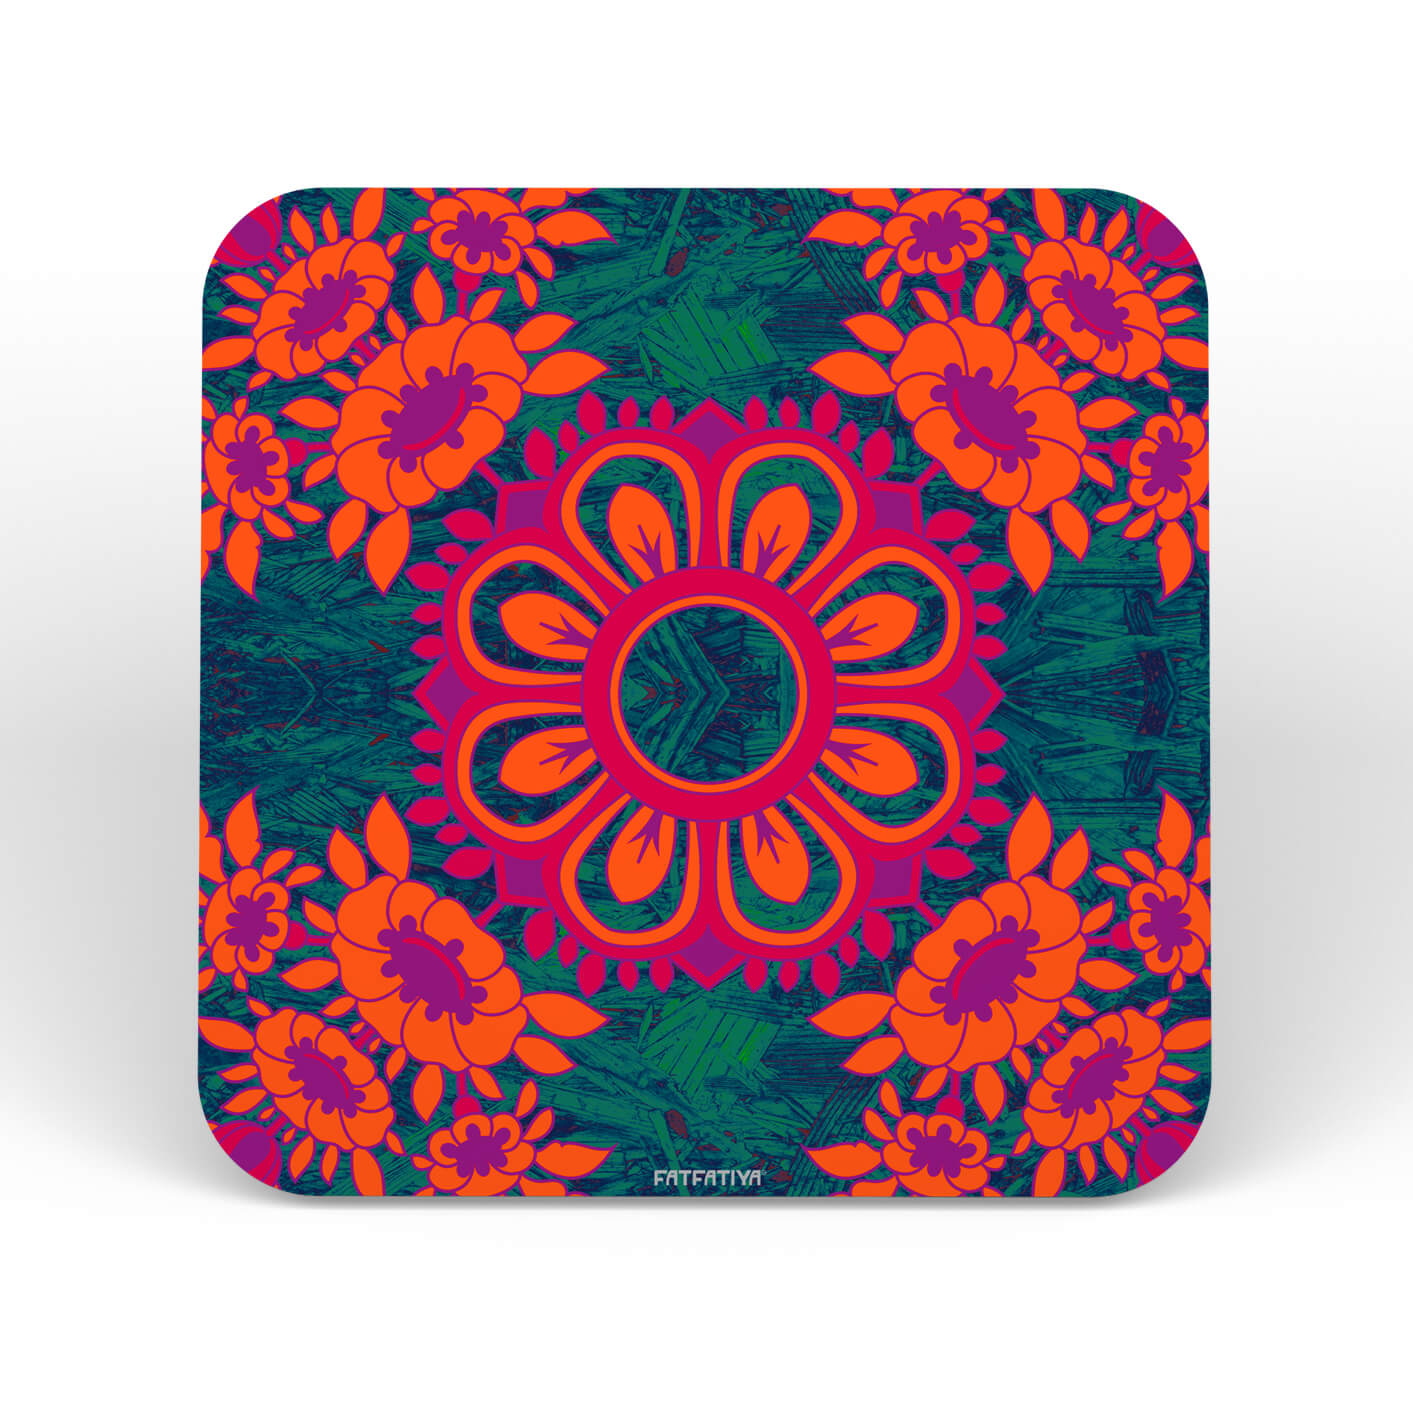 Magnificent Flower Motif Set of 6 Printed Coasters